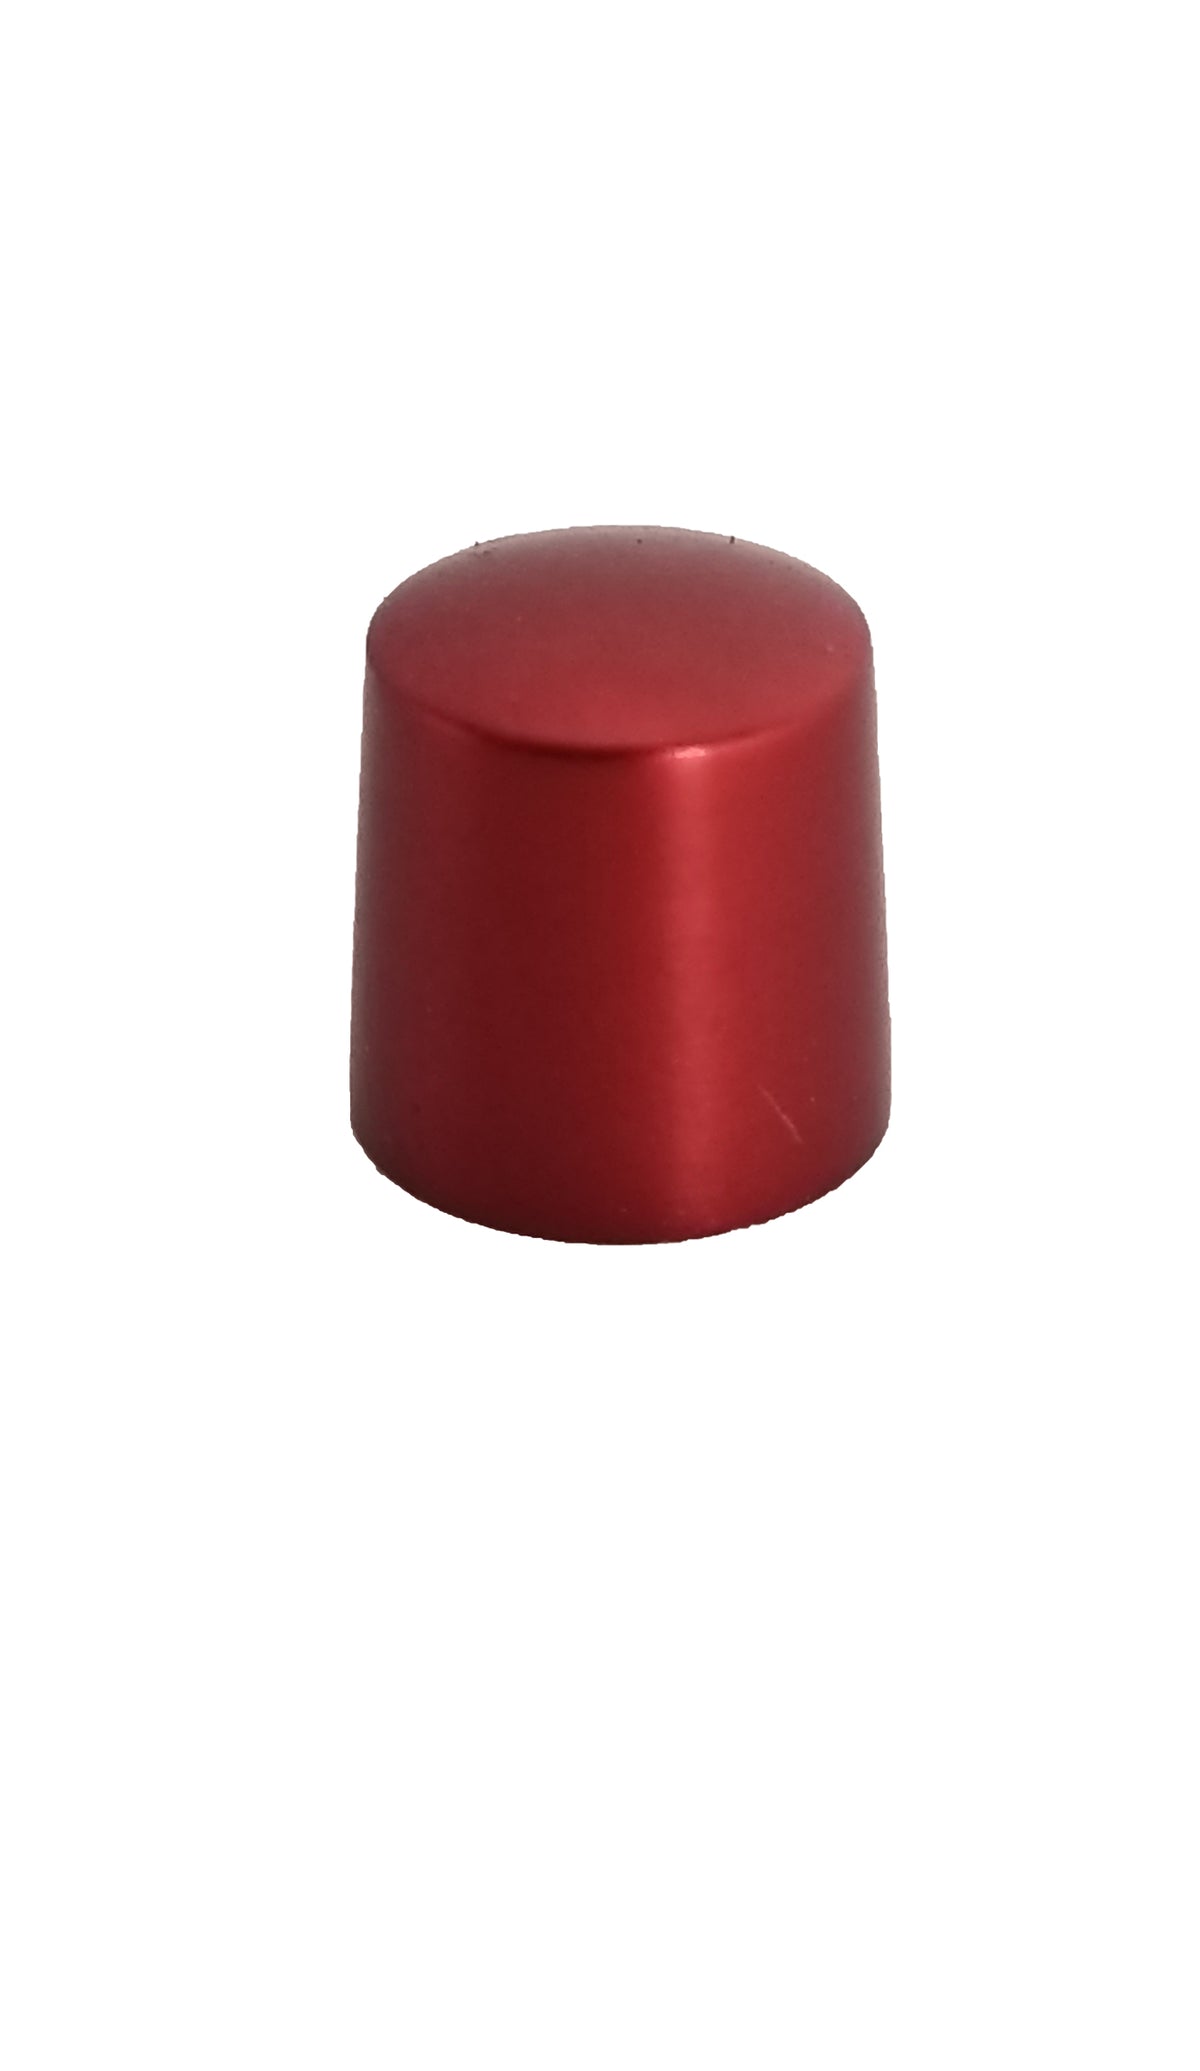 LM-7 Pushbutton